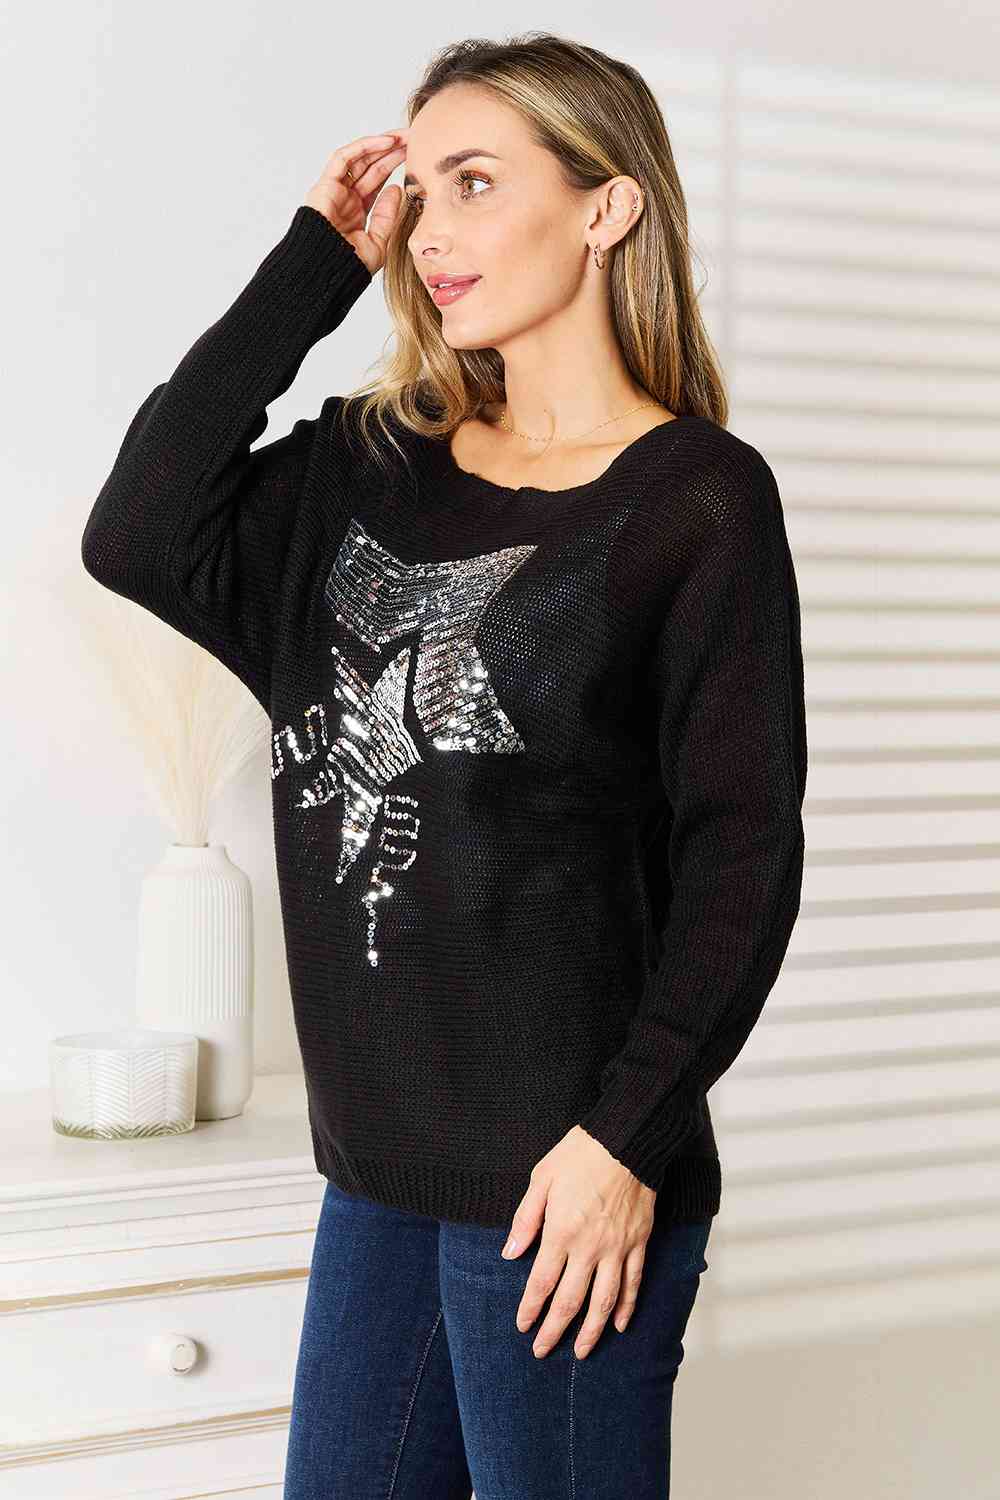 Sequin Graphic Dolman Sleeve Knit Top - Camis & Tops - Shirts & Tops - 7 - 2024